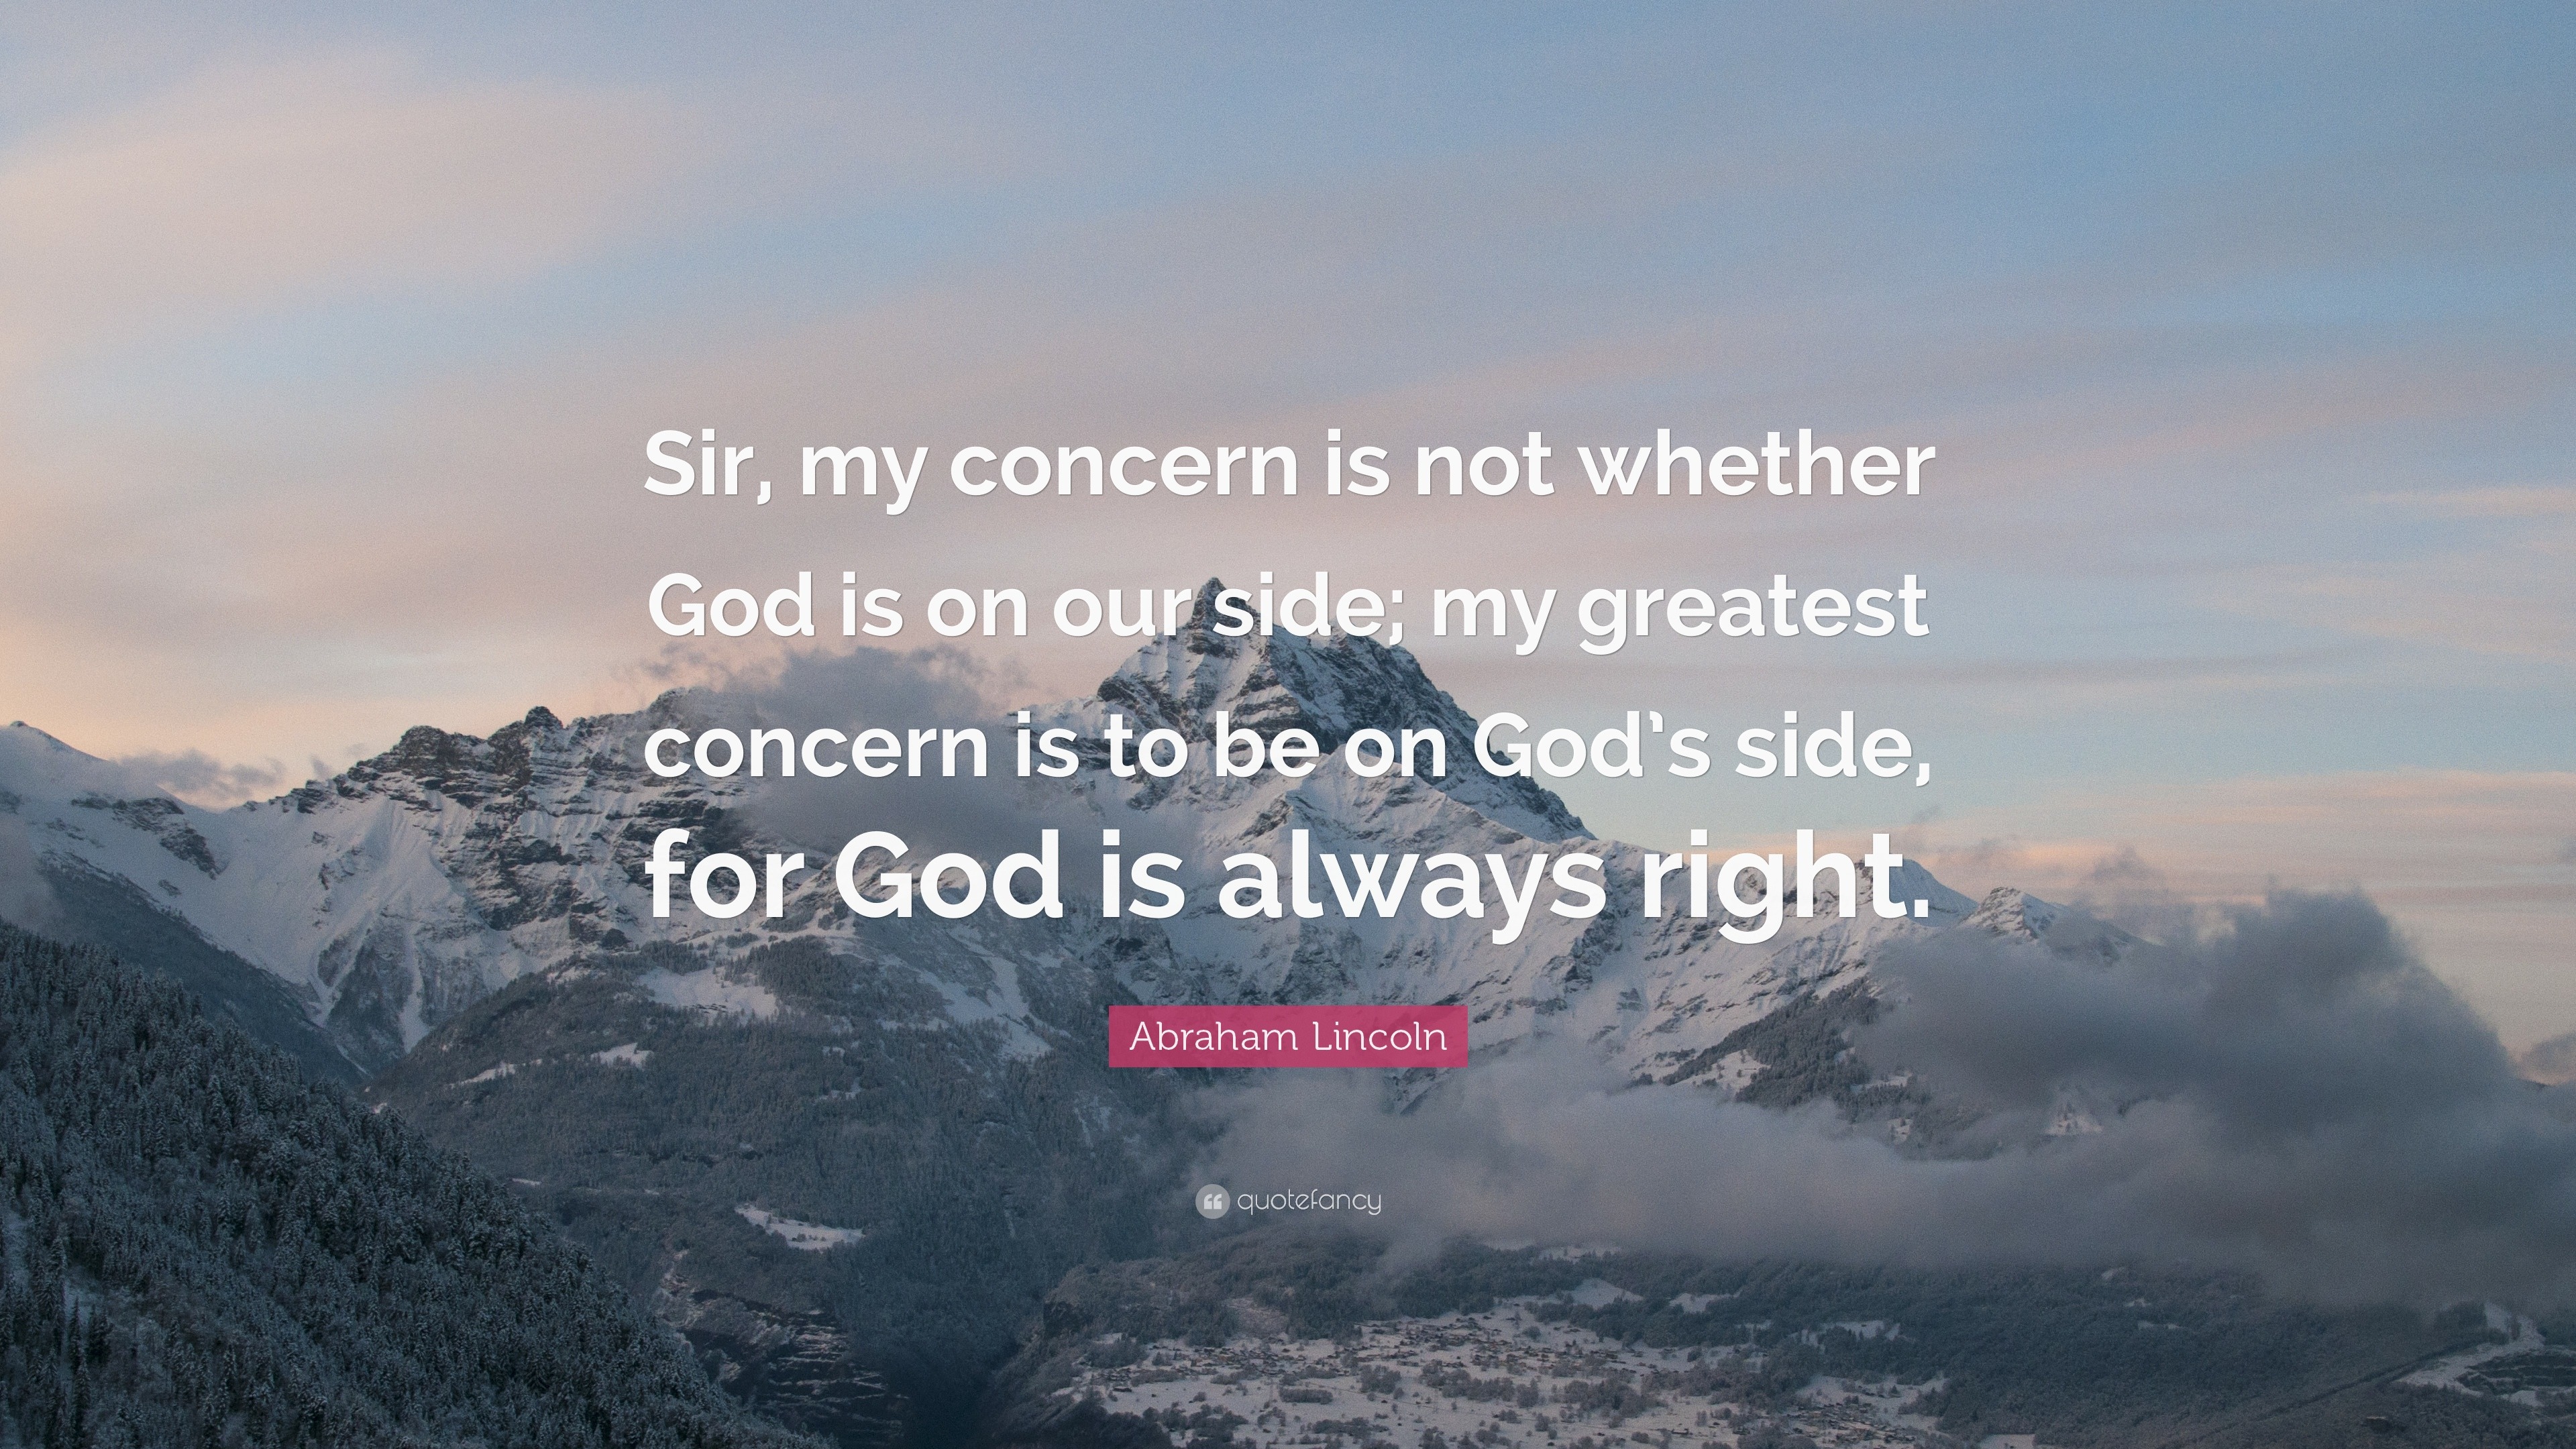 Abraham Lincoln Quote: “Sir, my concern is not whether God is on our